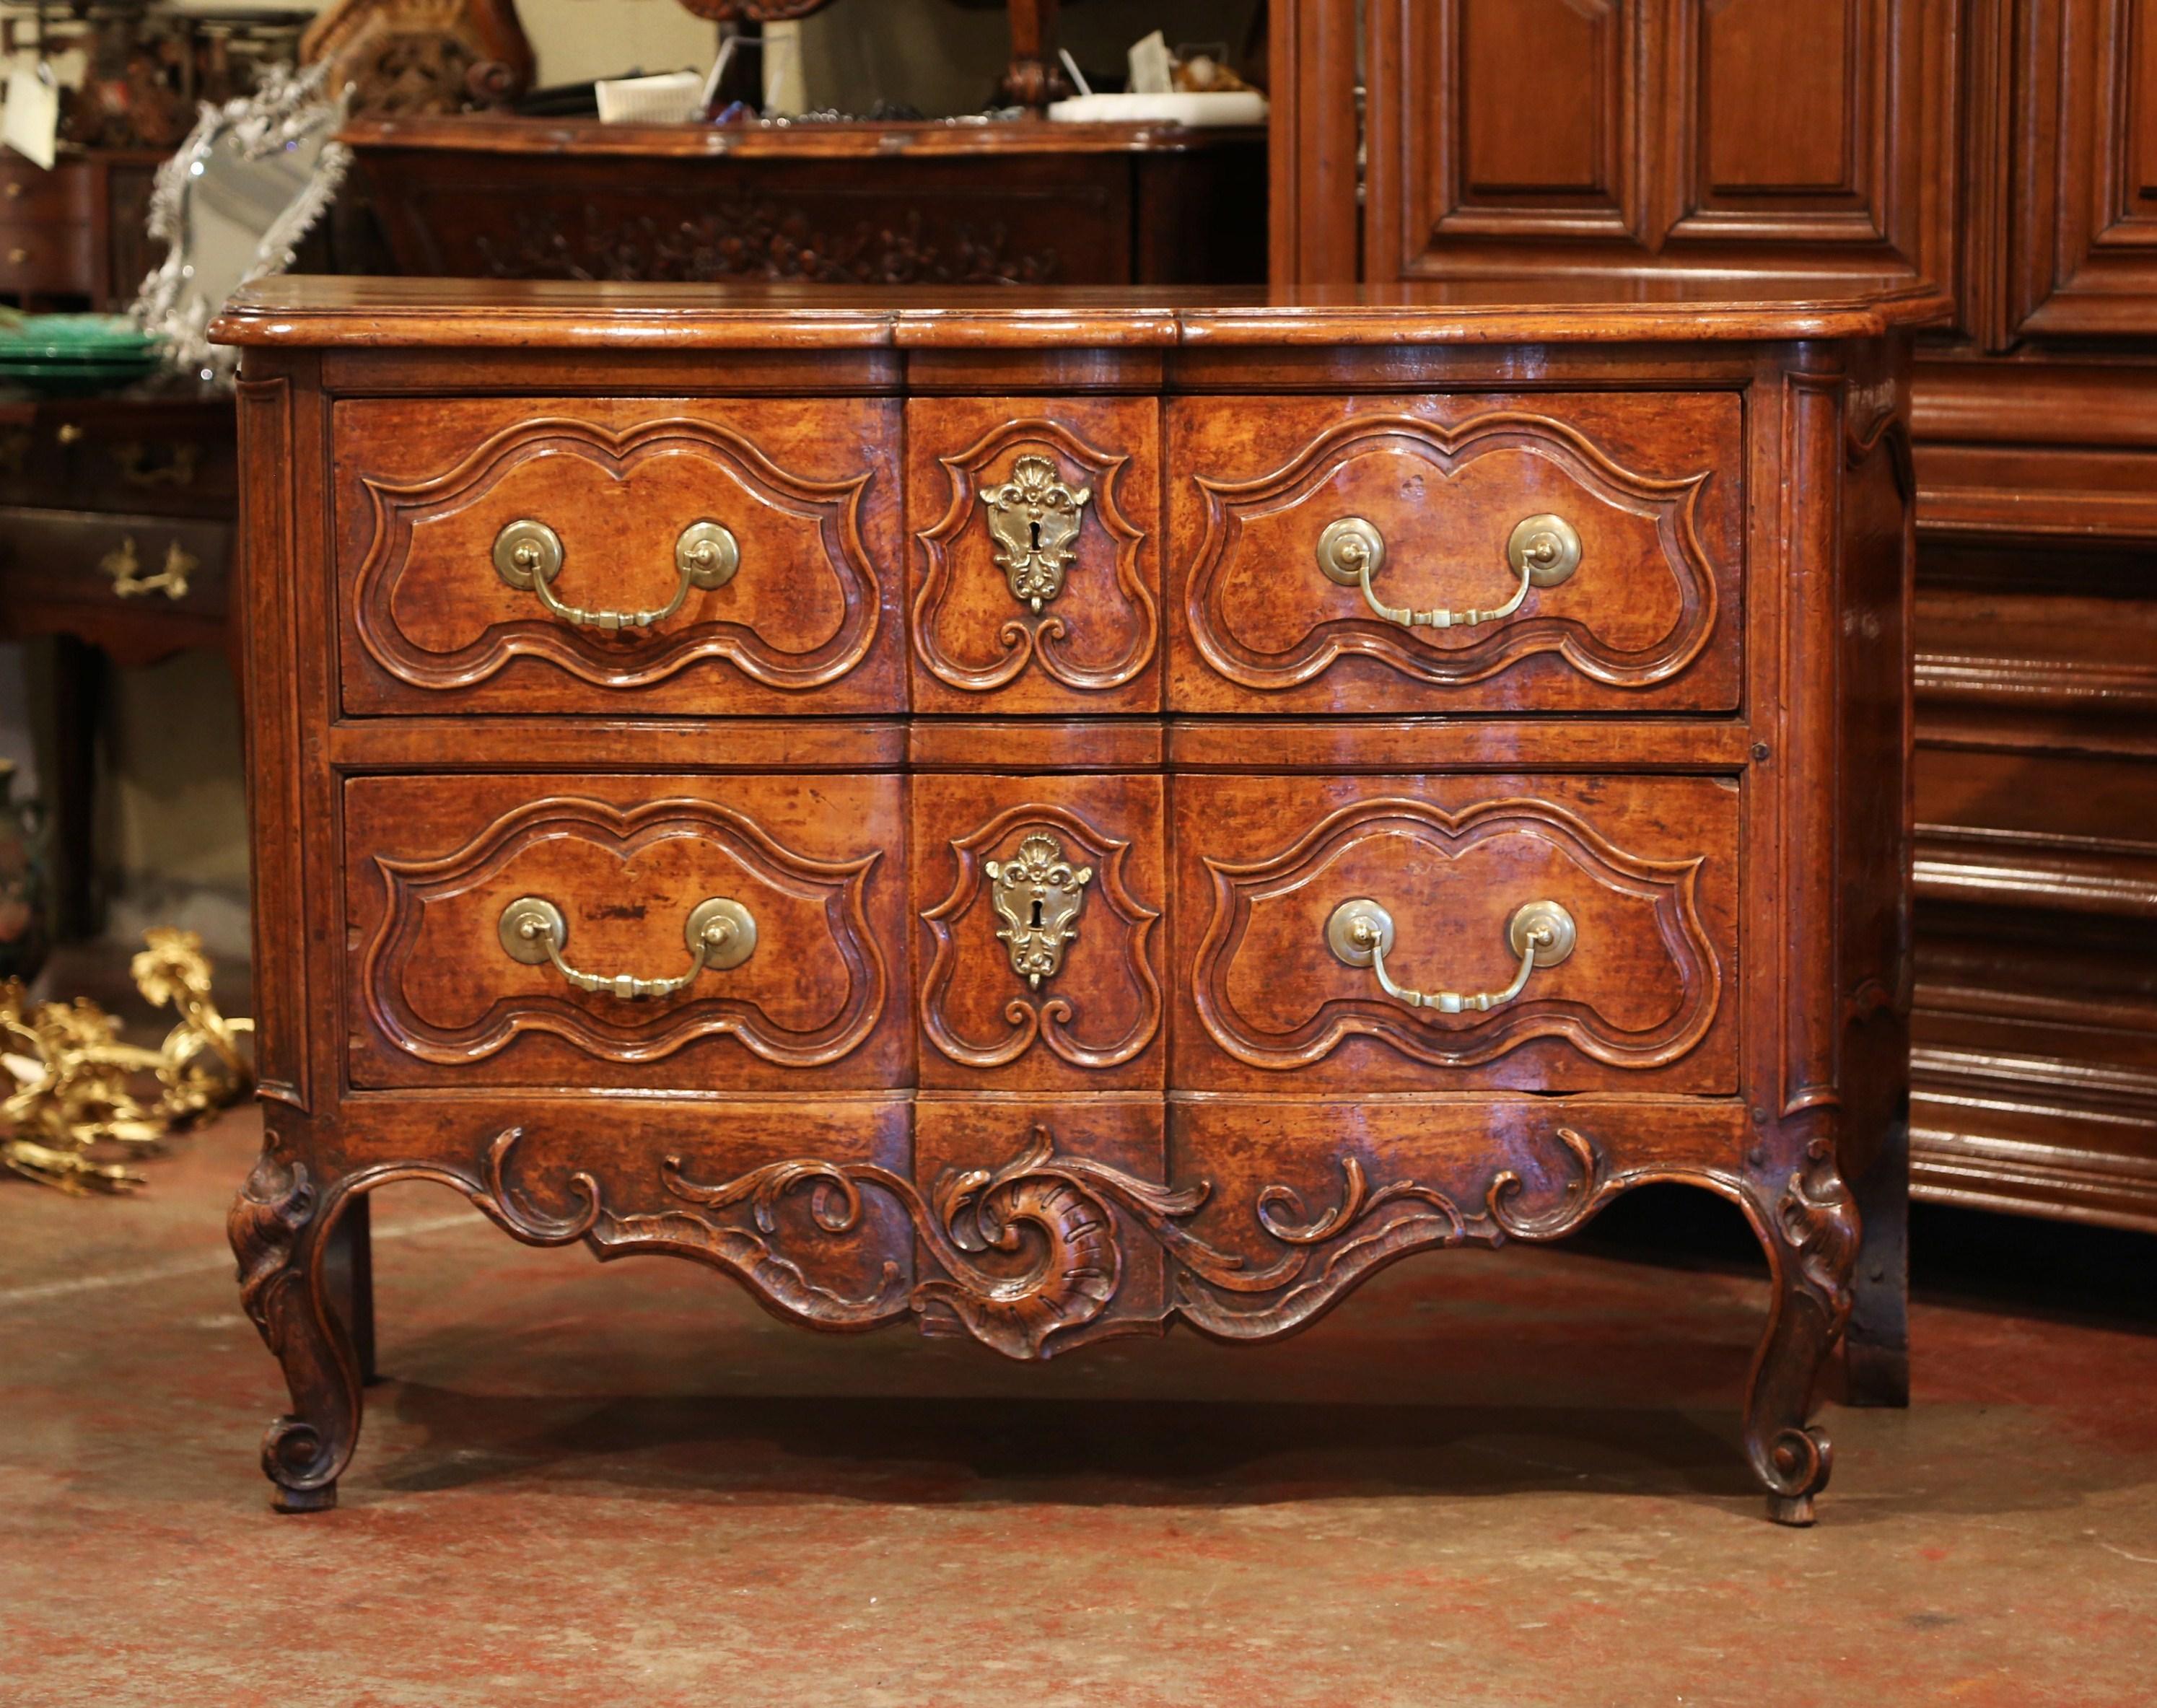 This important antique fruitwood commode was crafted in Southern France, during the reign of King Louis XV, circa 1745-1749, which was determined by its tax stamp. The elegant chest with curved sides, features a serpentine moulded front with two